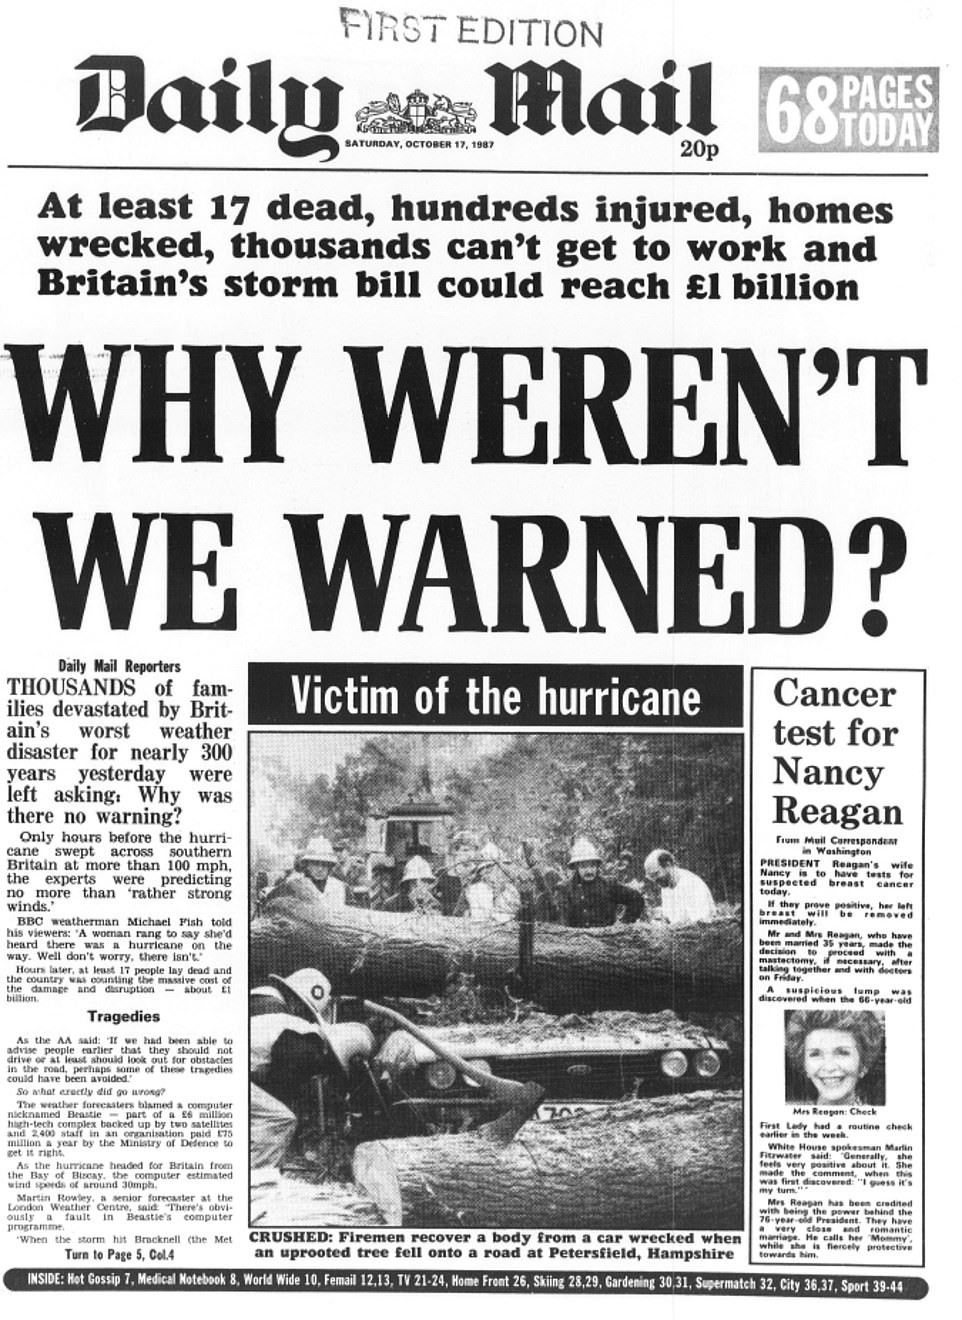 Storm 1987 the Great October why were we not warned? Daily Mail frontpage